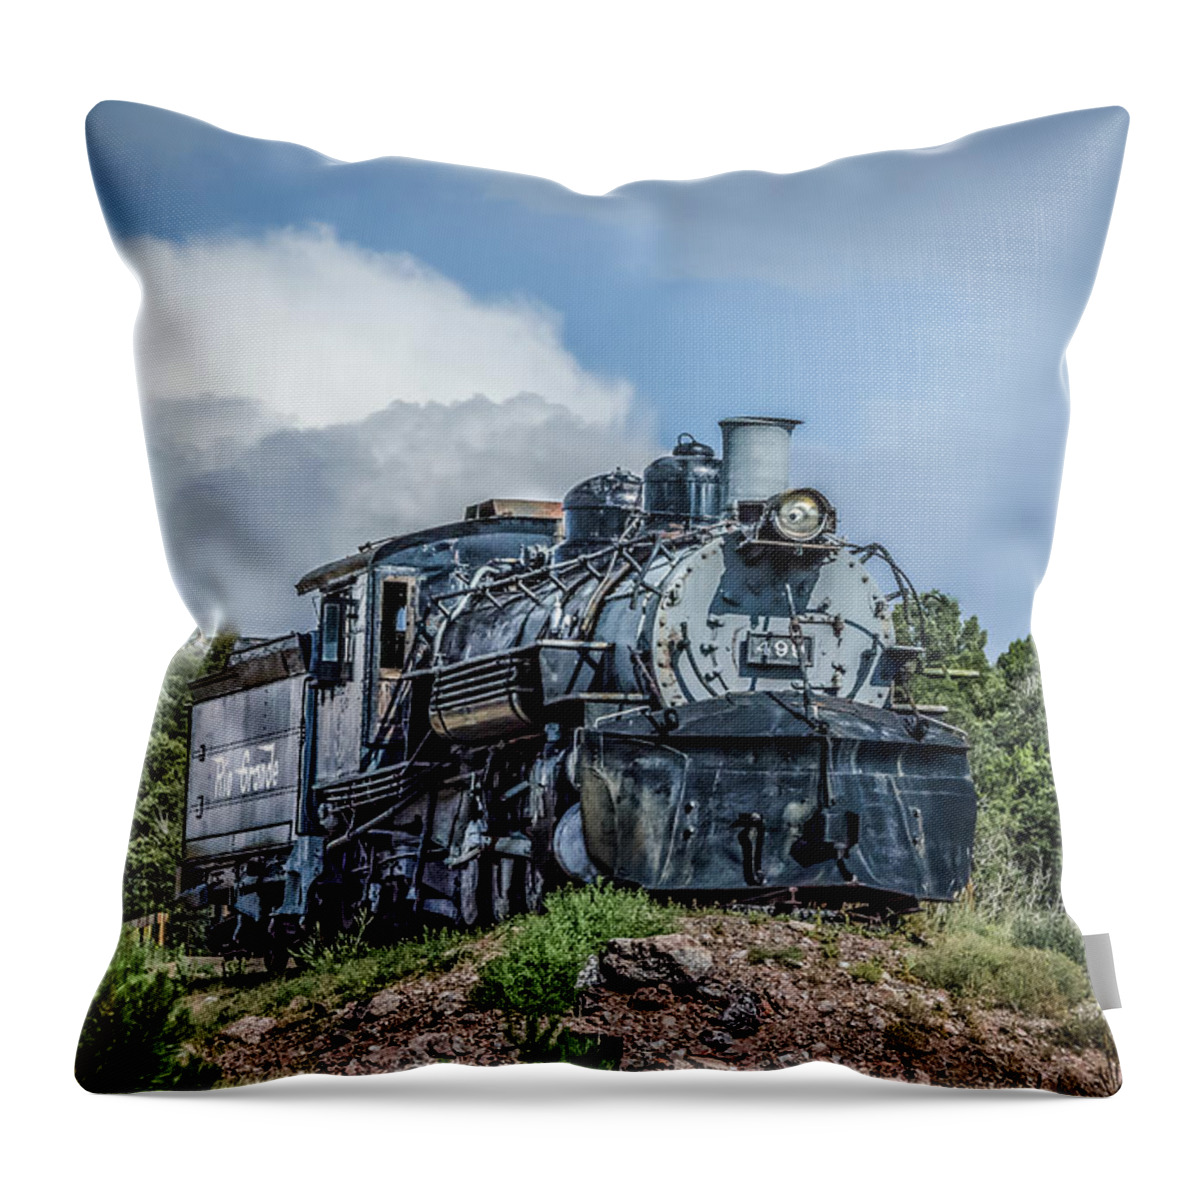 Train Engine Throw Pillow featuring the photograph Engine 51 by Jaime Mercado